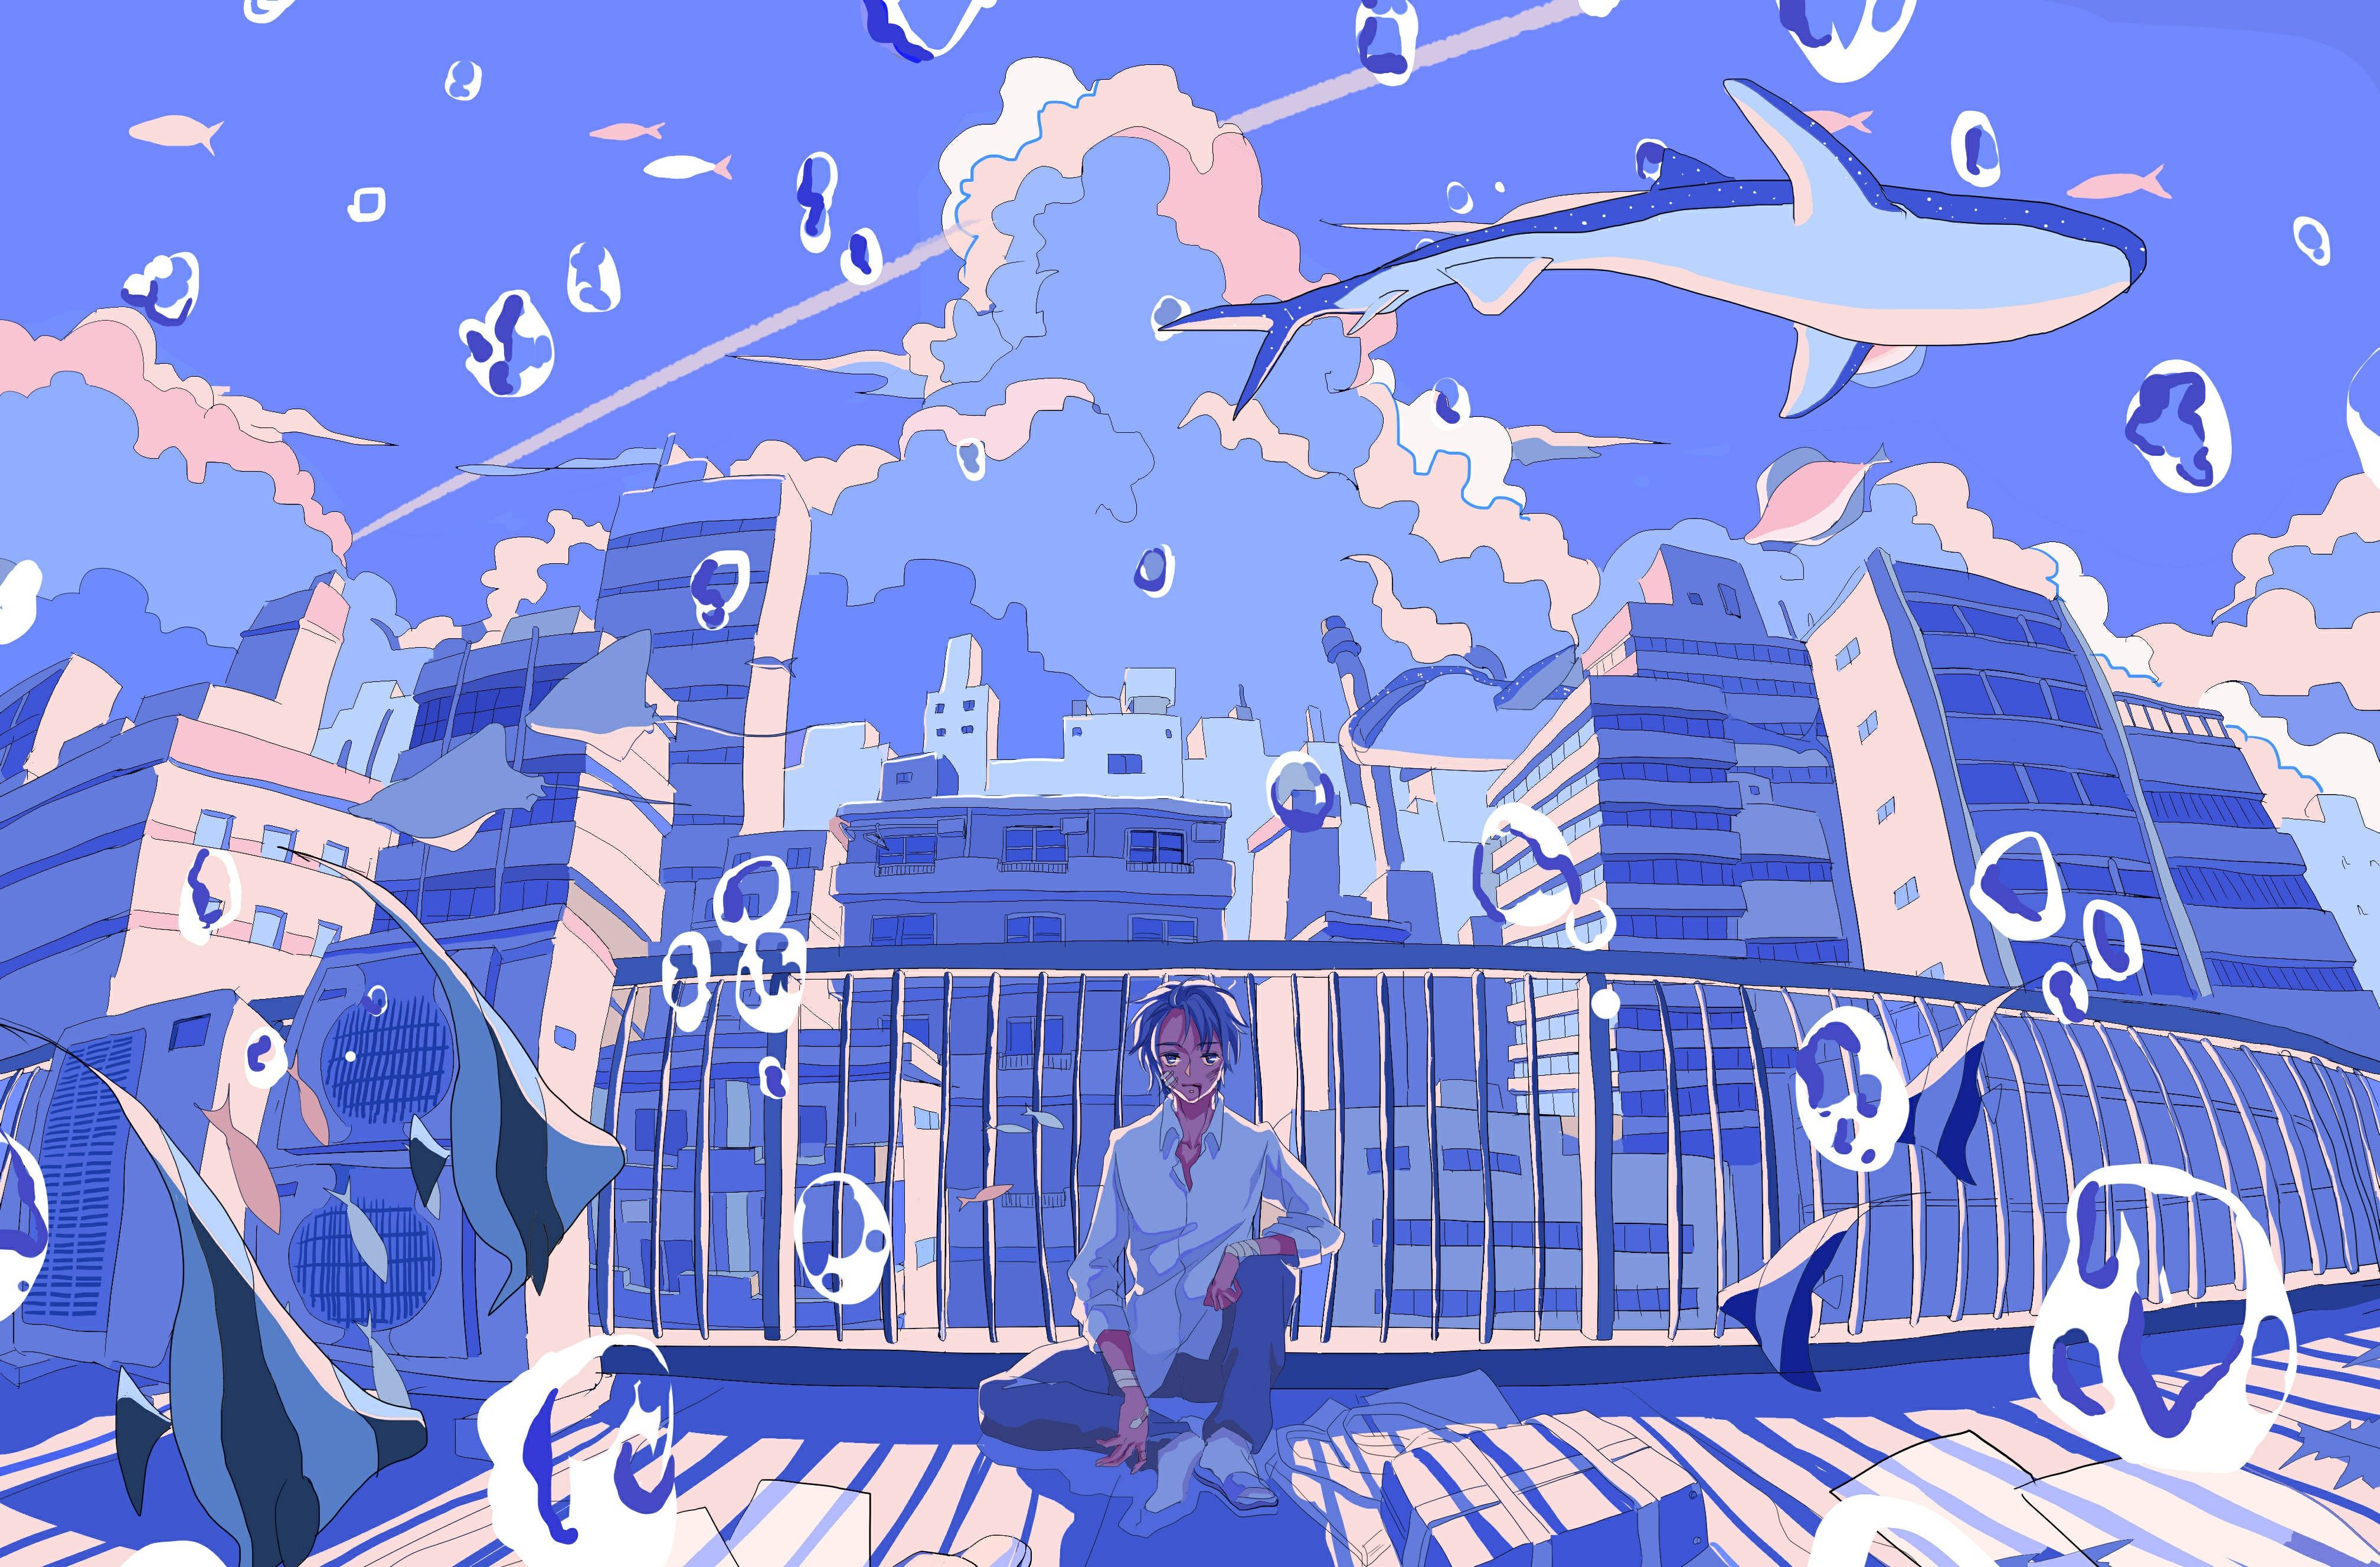 A digital artwork of a young person sitting on a rooftop surrounded by bubbles - Blue anime